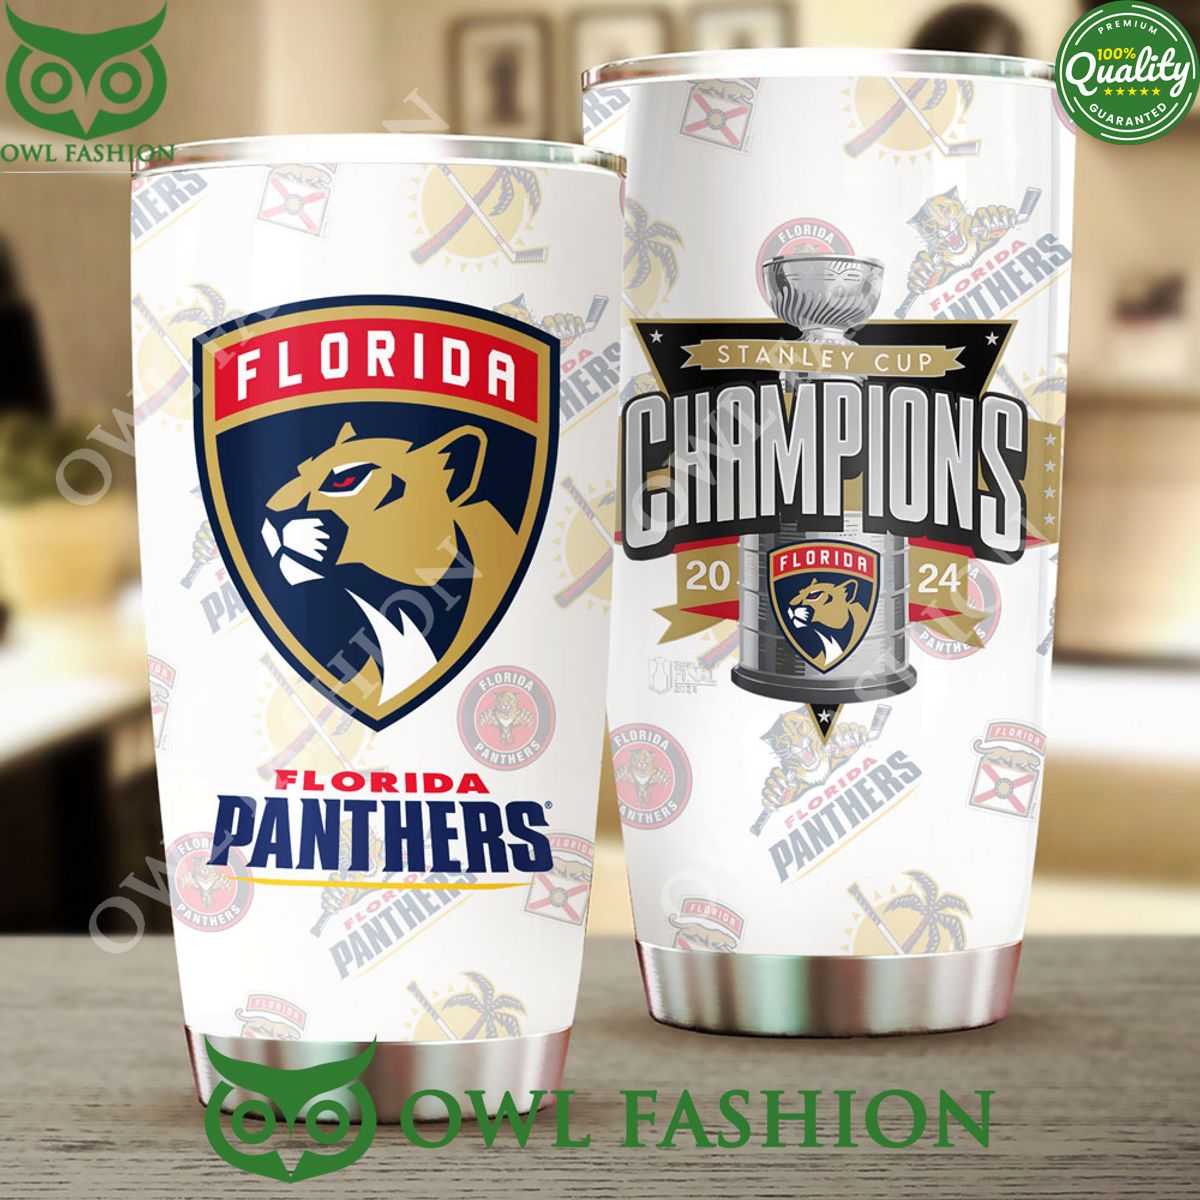 florida panthers stanley cup champions limited tumbler cup 1 9gtzh.jpg